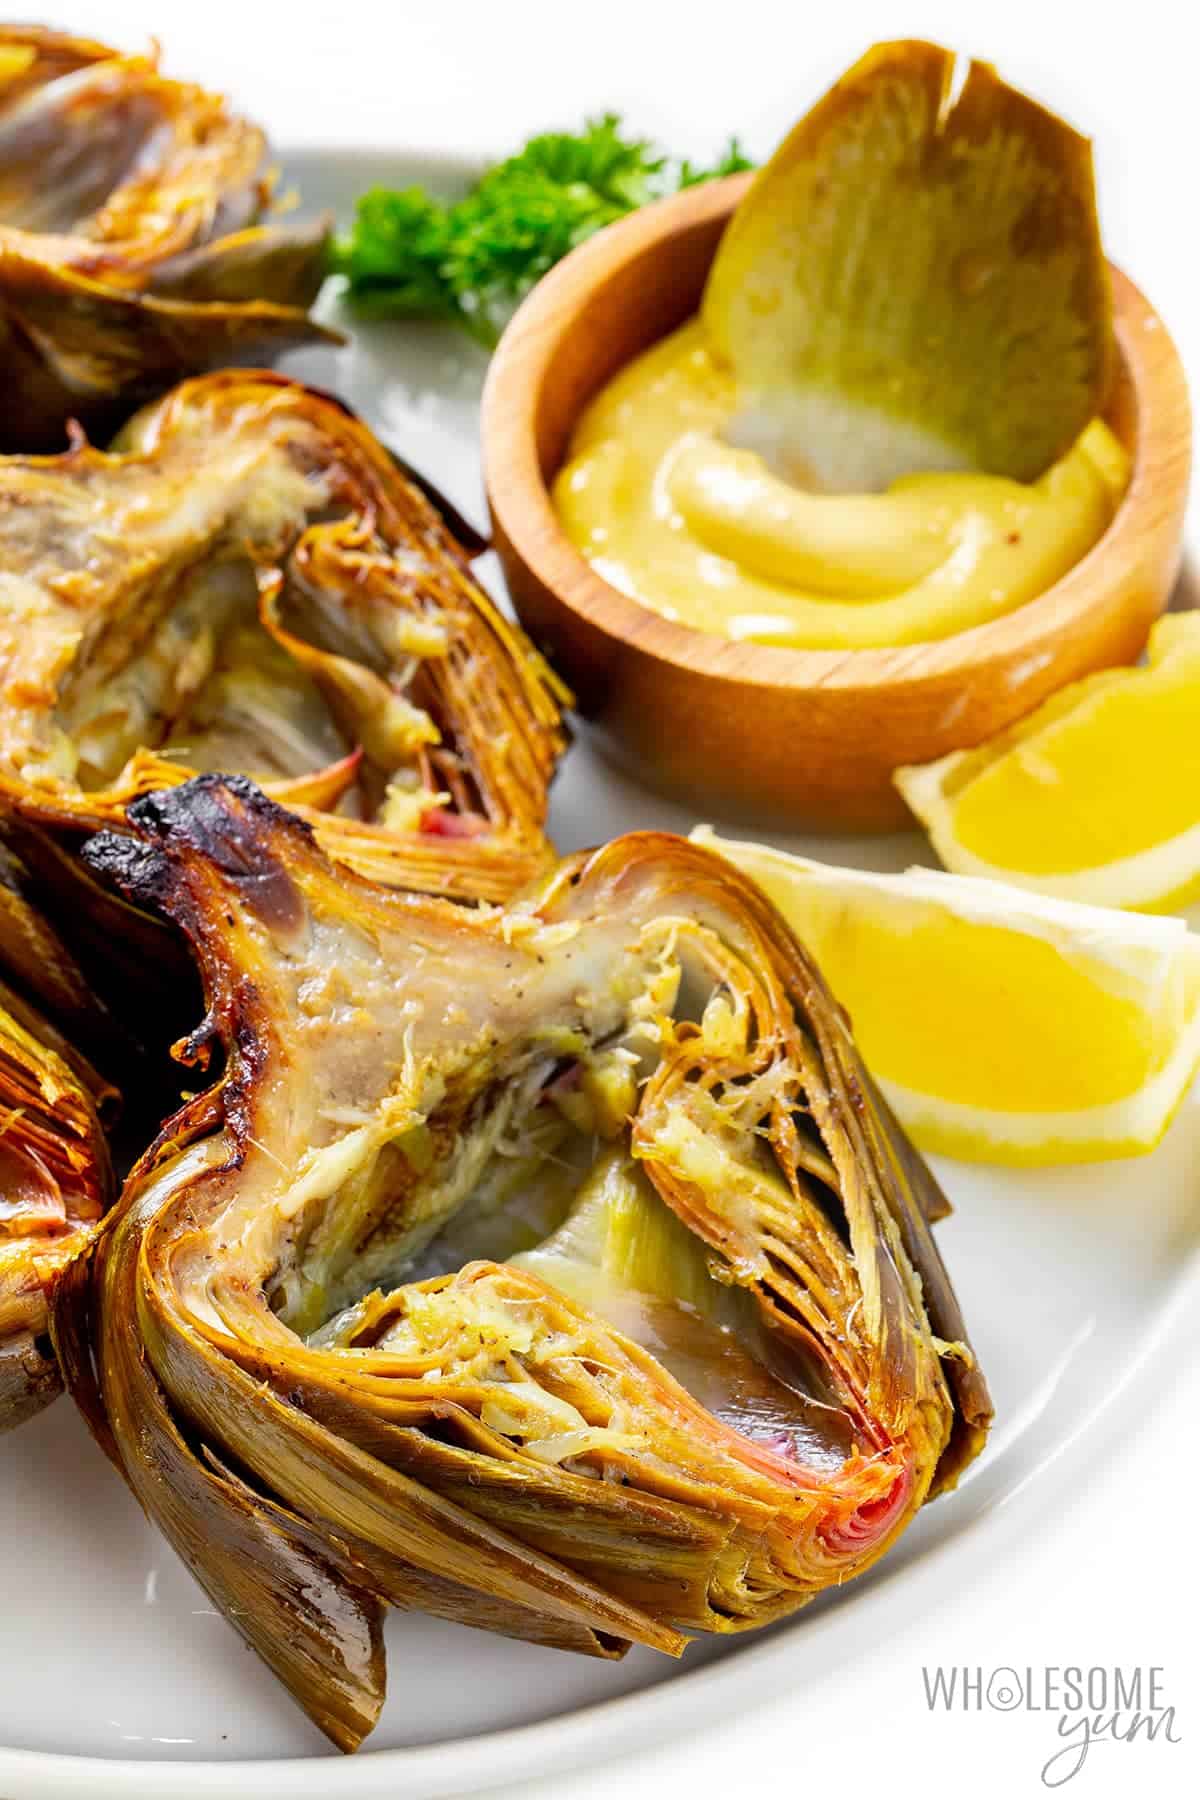 Finished artichokes on a plate with one petal dunked in aioli sauce.